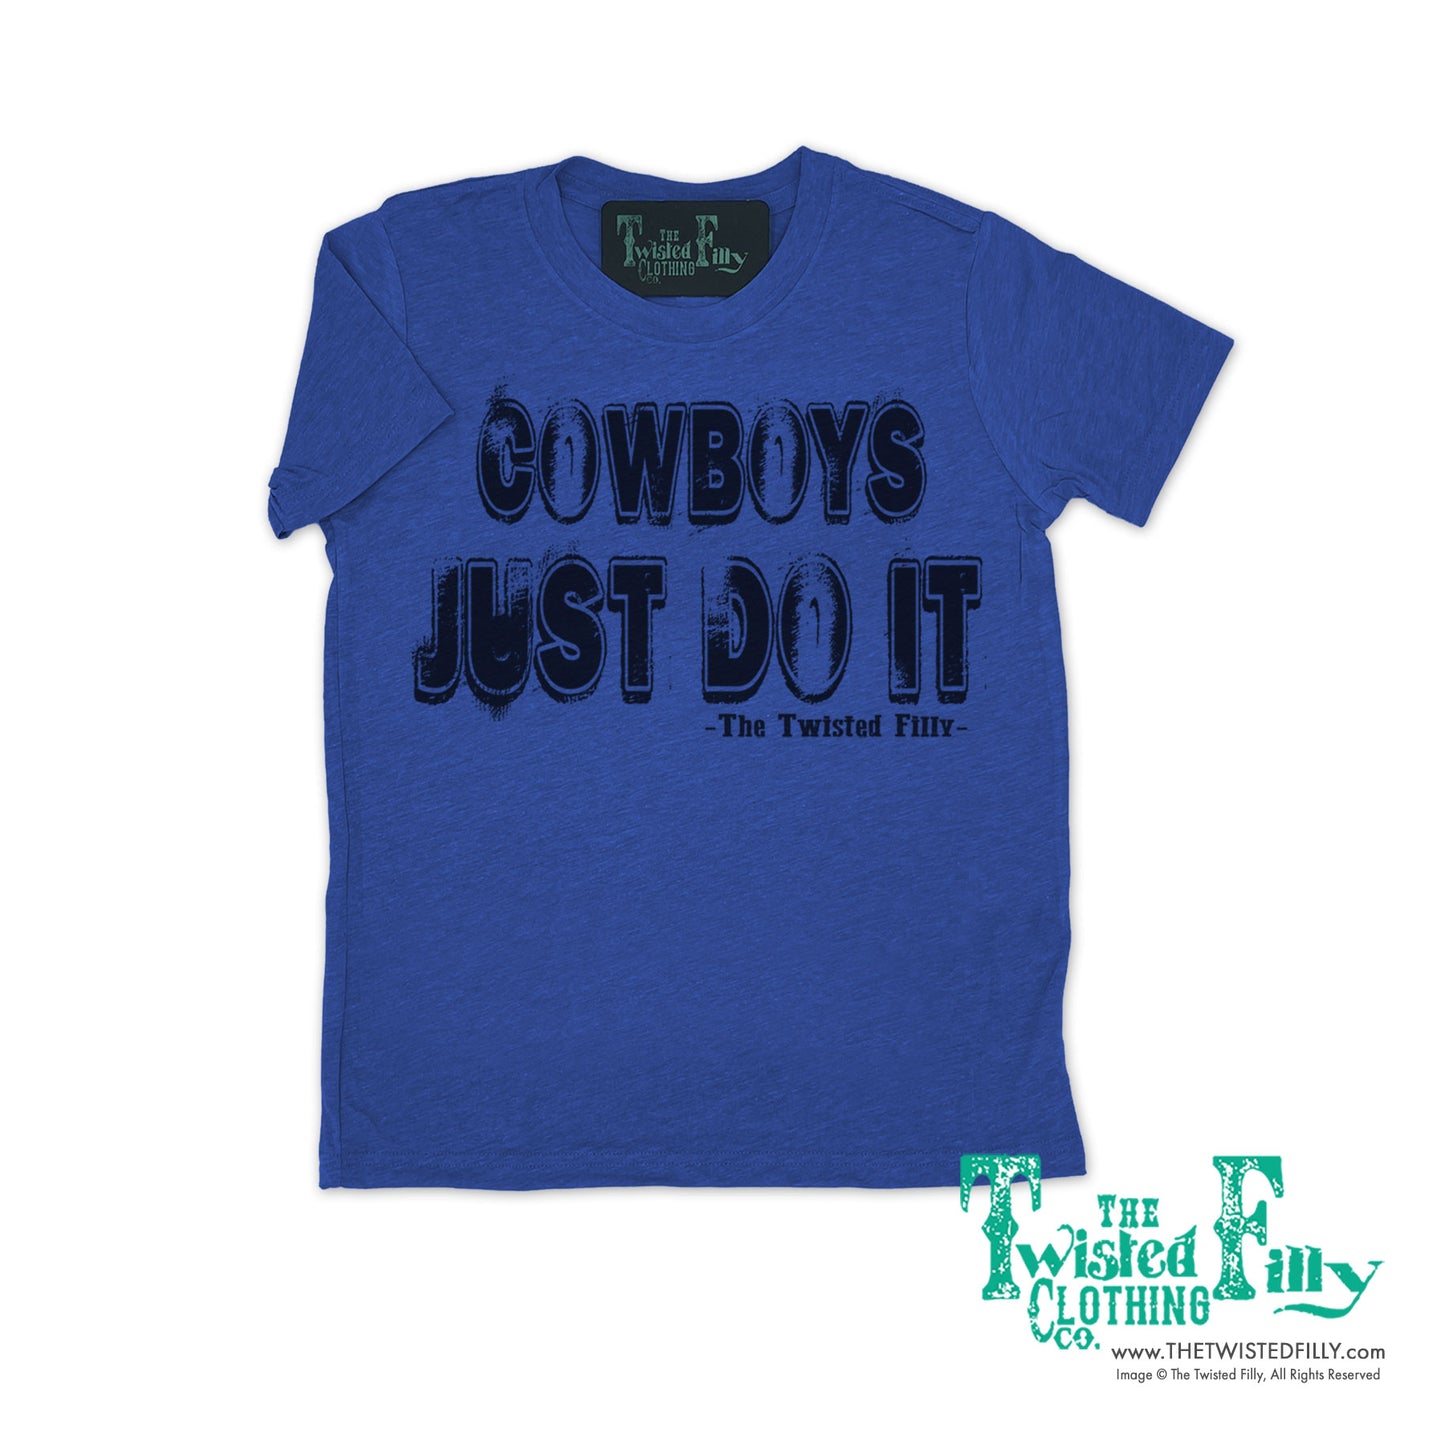 Cowboys Just Do It - S/S Boys Youth Tee - Assorted Colors